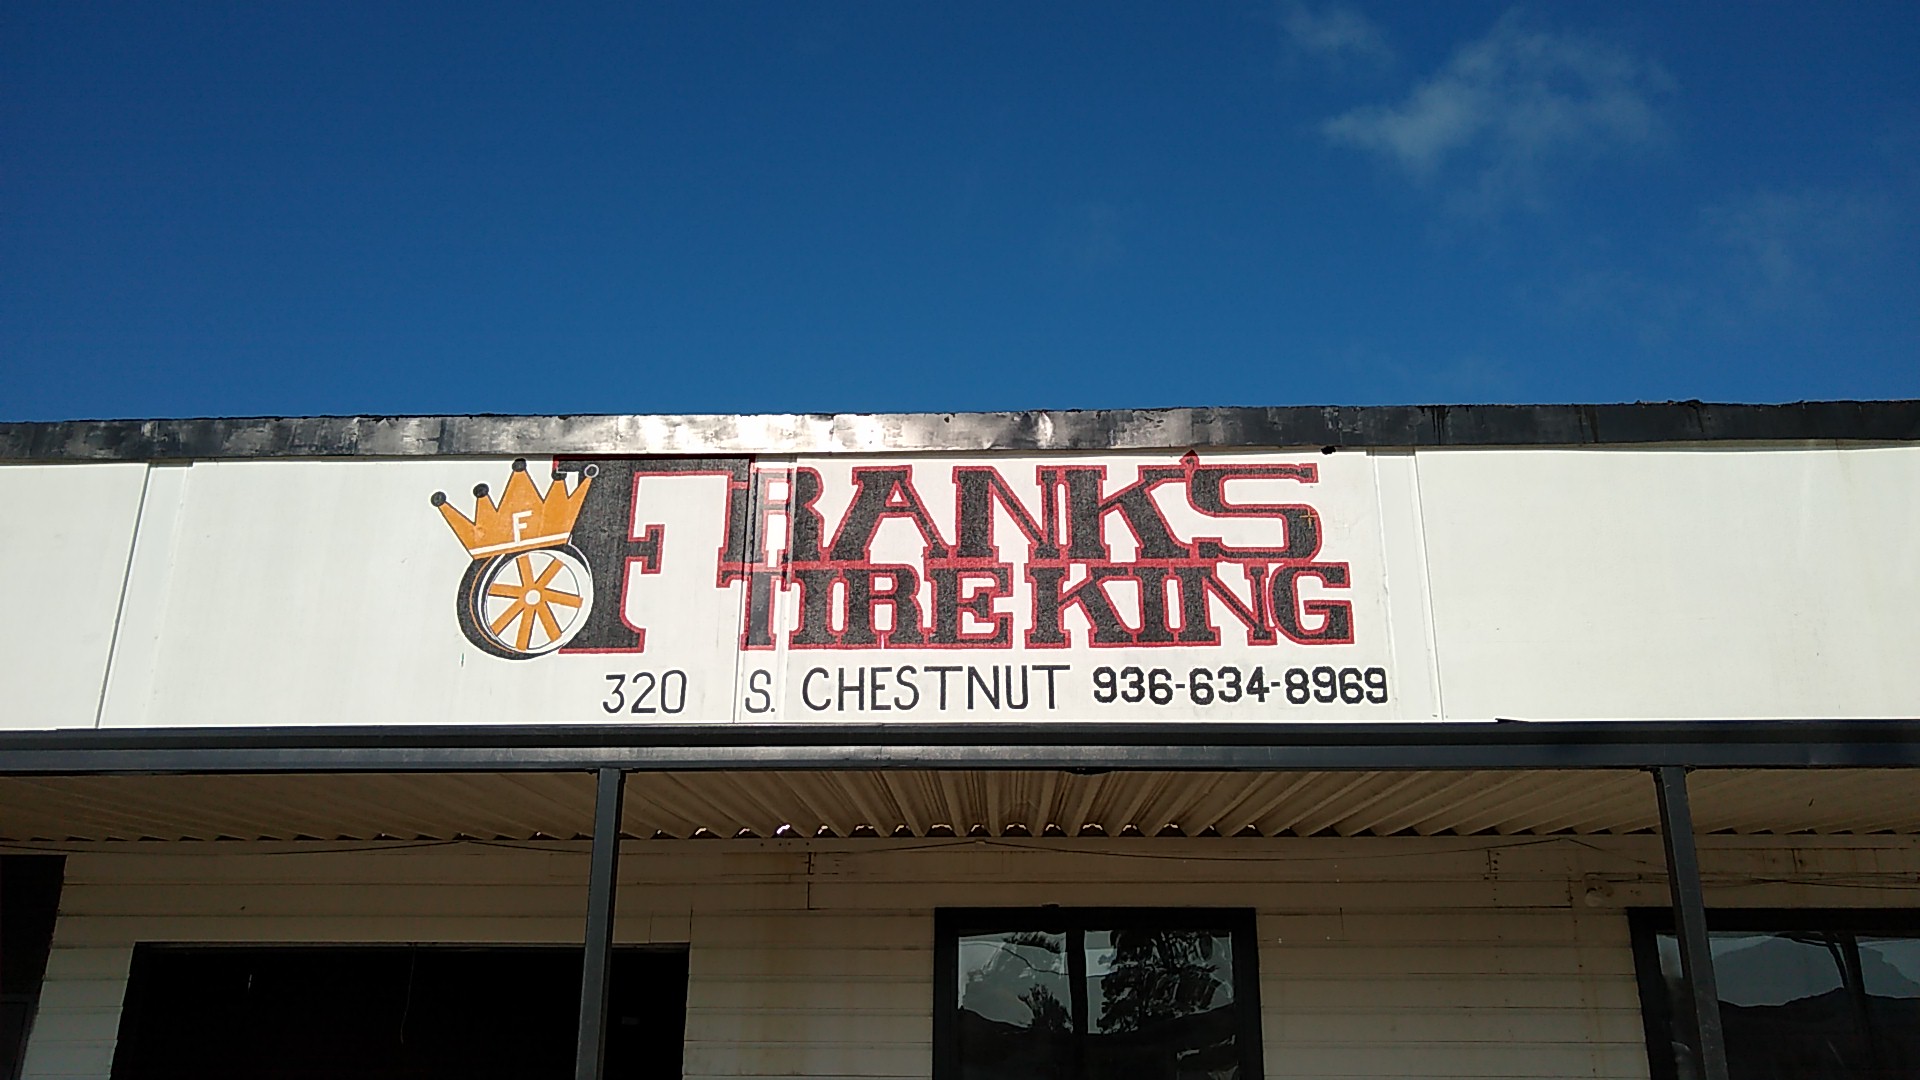 Frank's Tire King